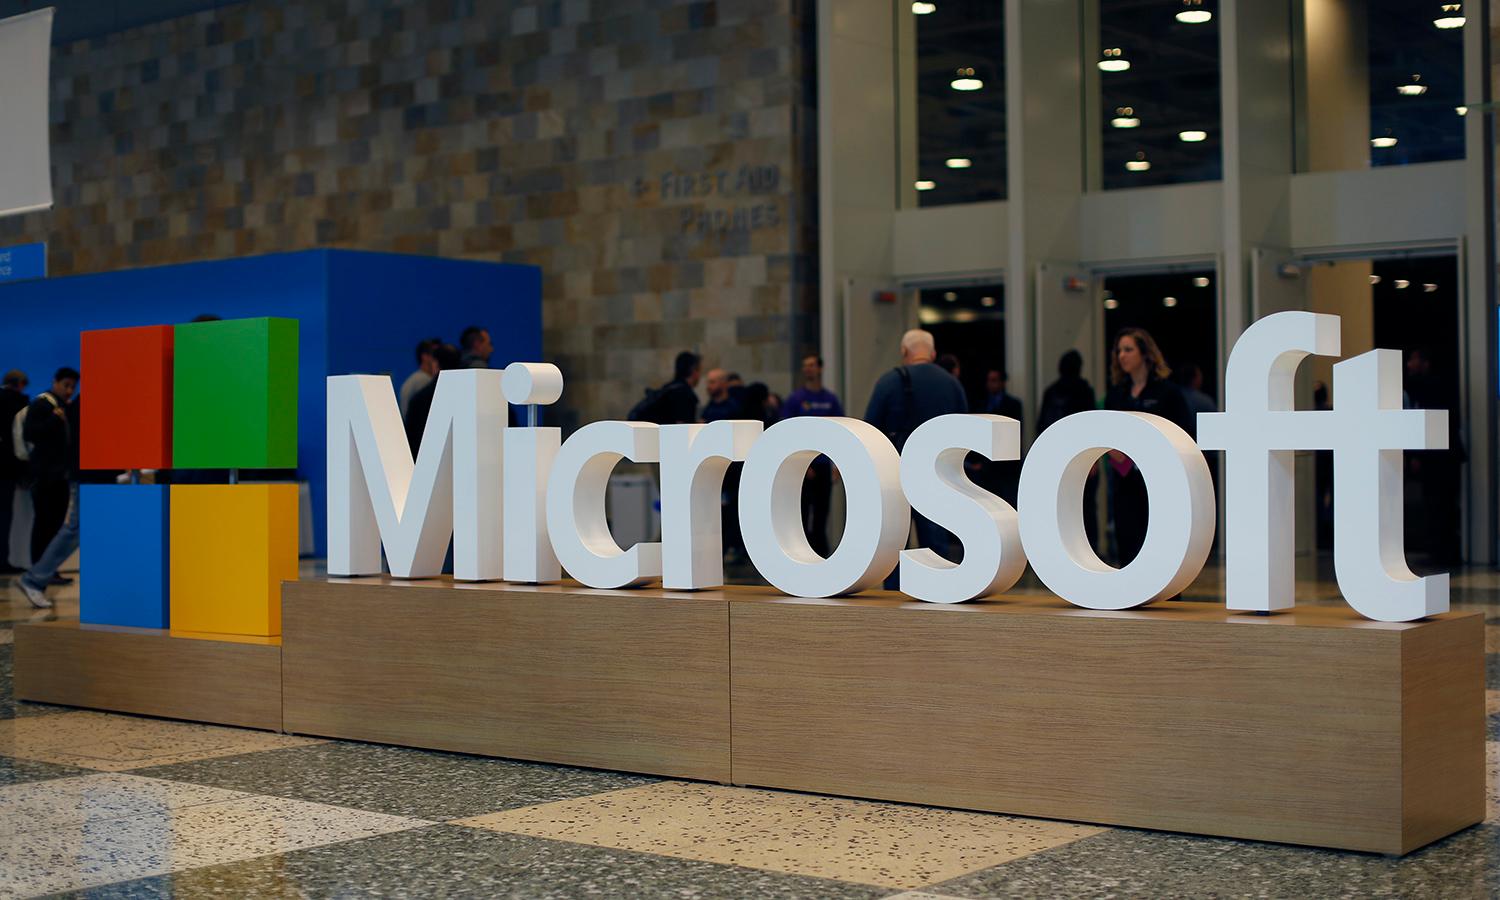 A Microsoft logo is seen during the 2015 Microsoft Build Conference on April 29, 2015, at Moscone Center in San Francisco. (Photo by Stephen Lam/Getty Images)